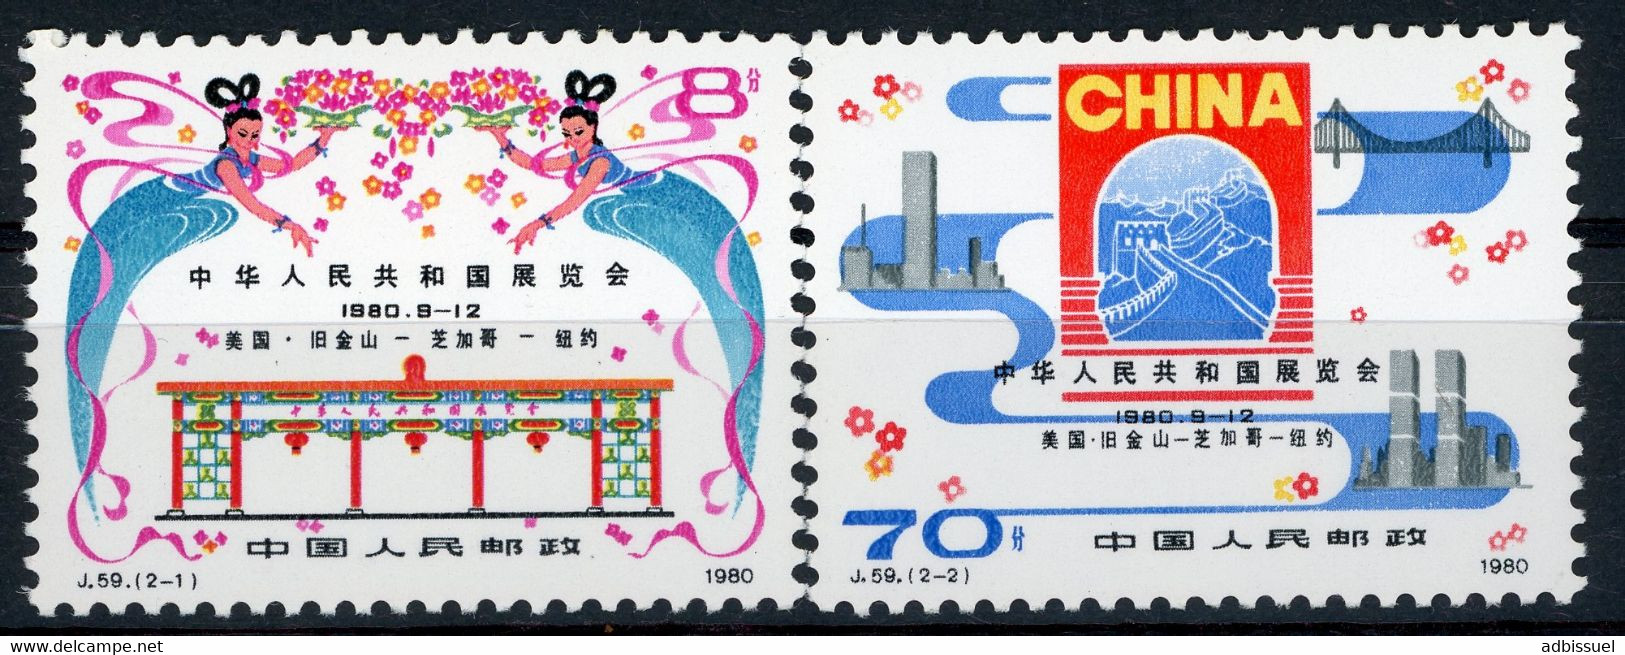 CHINA CHINE 1980 N° 2366 + 2367. Value (cote) 23 € MNH. VG/TB. Chinese Trade Show (Exposition Commerciale Chinoise) - Nuevos